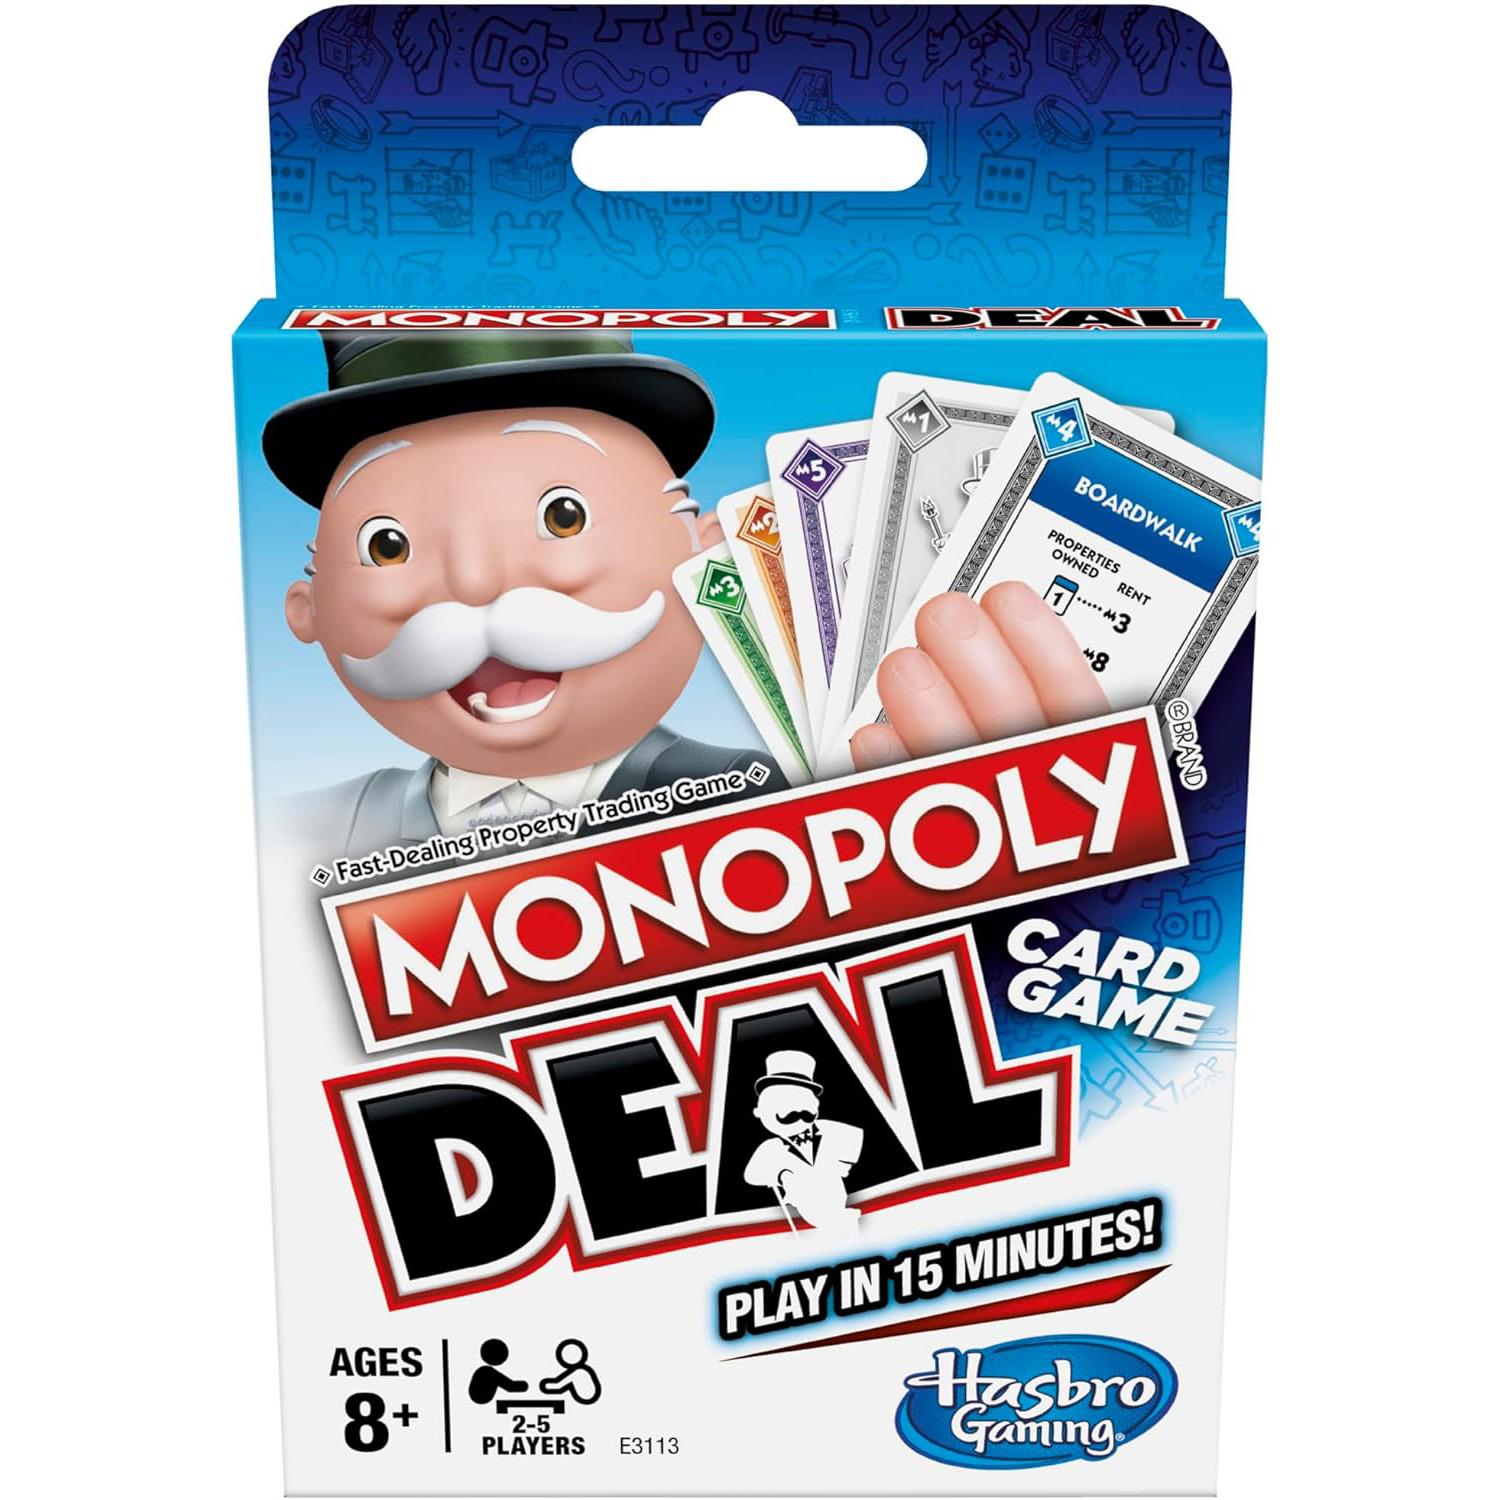 Monopoly Deal Quick Playing Card Game 3 Pack for $5.98